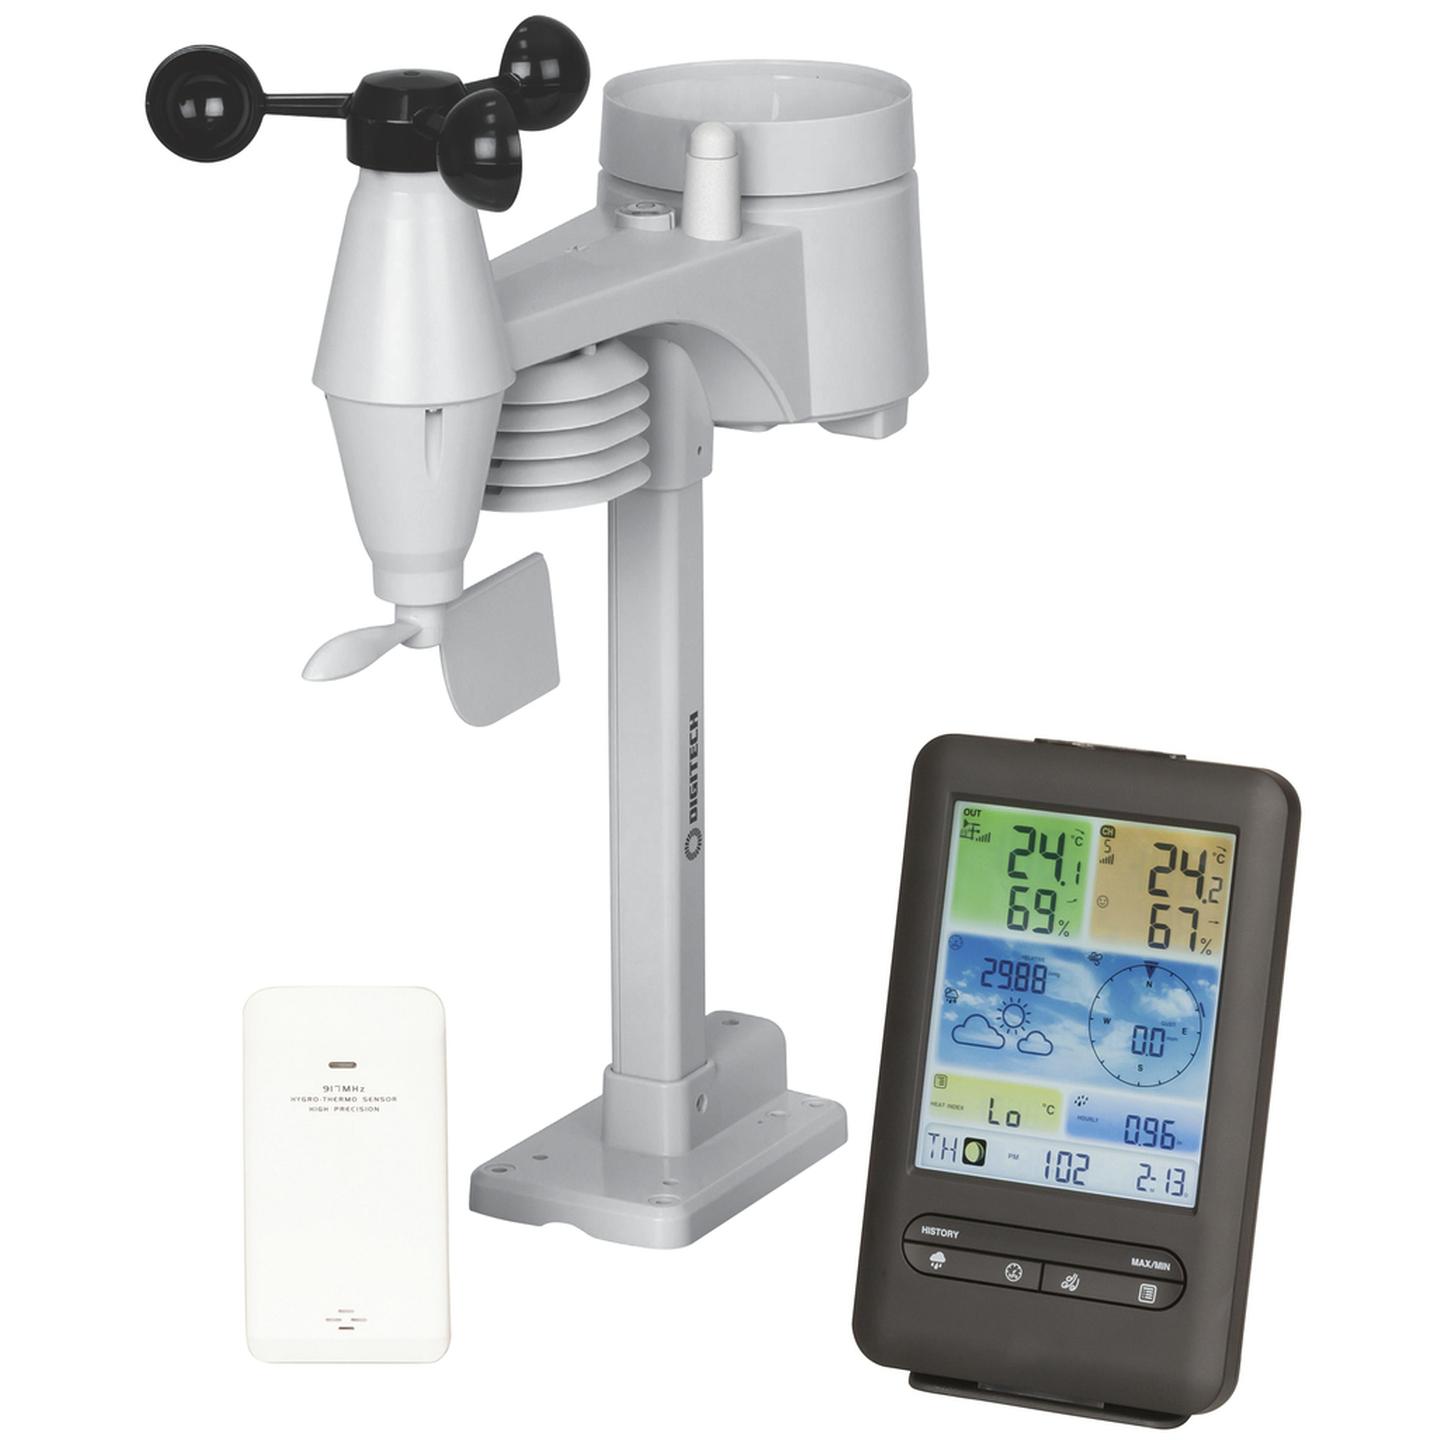 Wireless Digital Weather Station with Colourful LCD Display and Wi-Fi